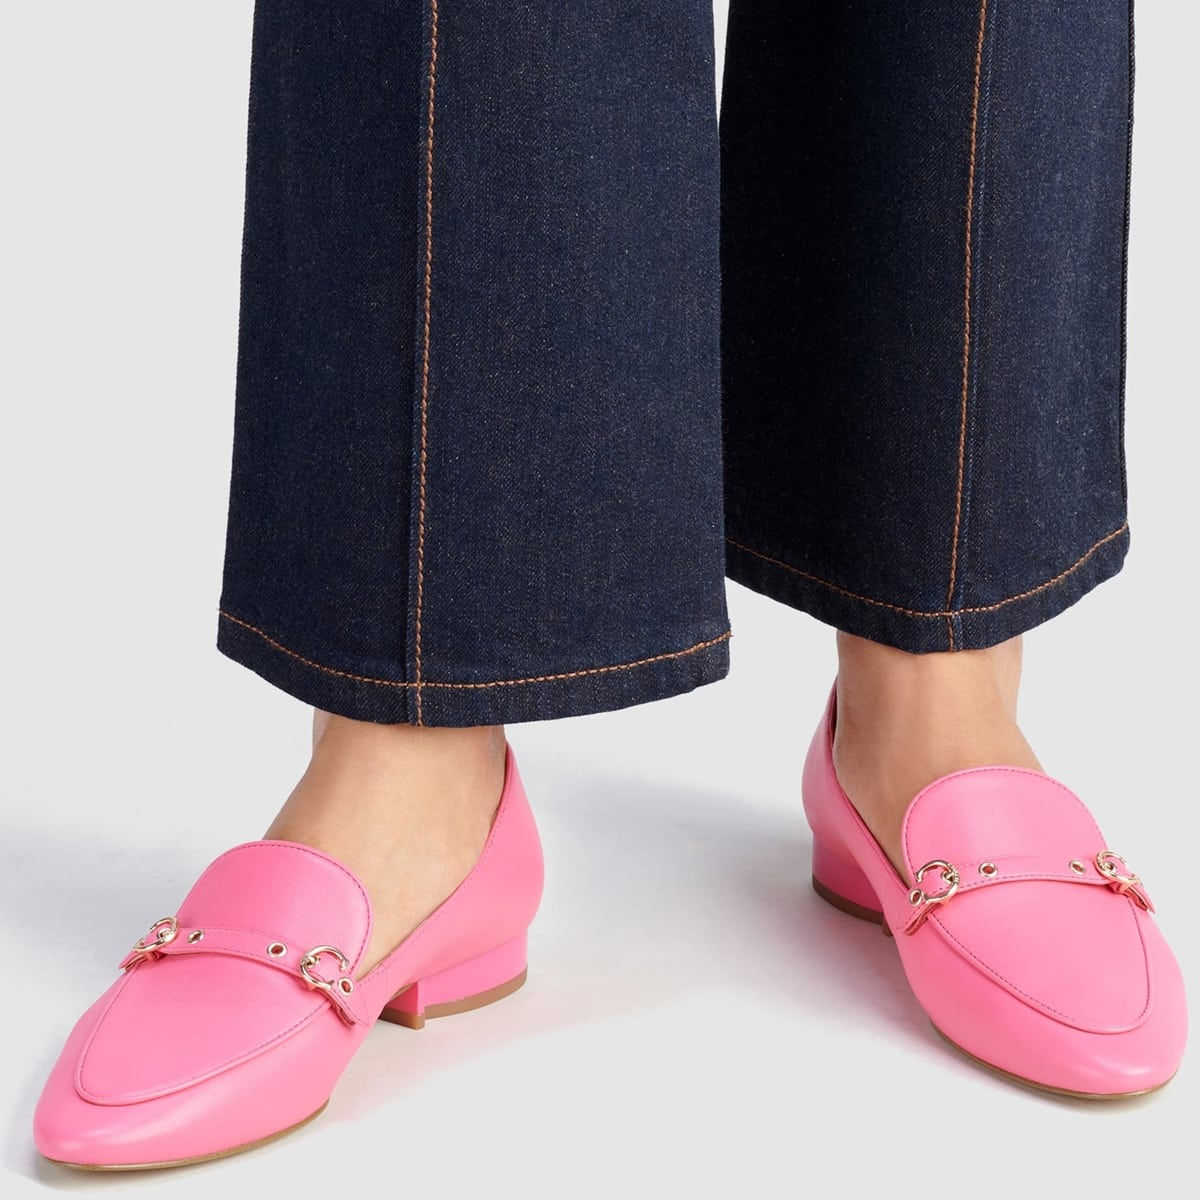 Polished buckles modeled after the Coach logo add a signature element to this bright watermelon suave, streamlined loafer